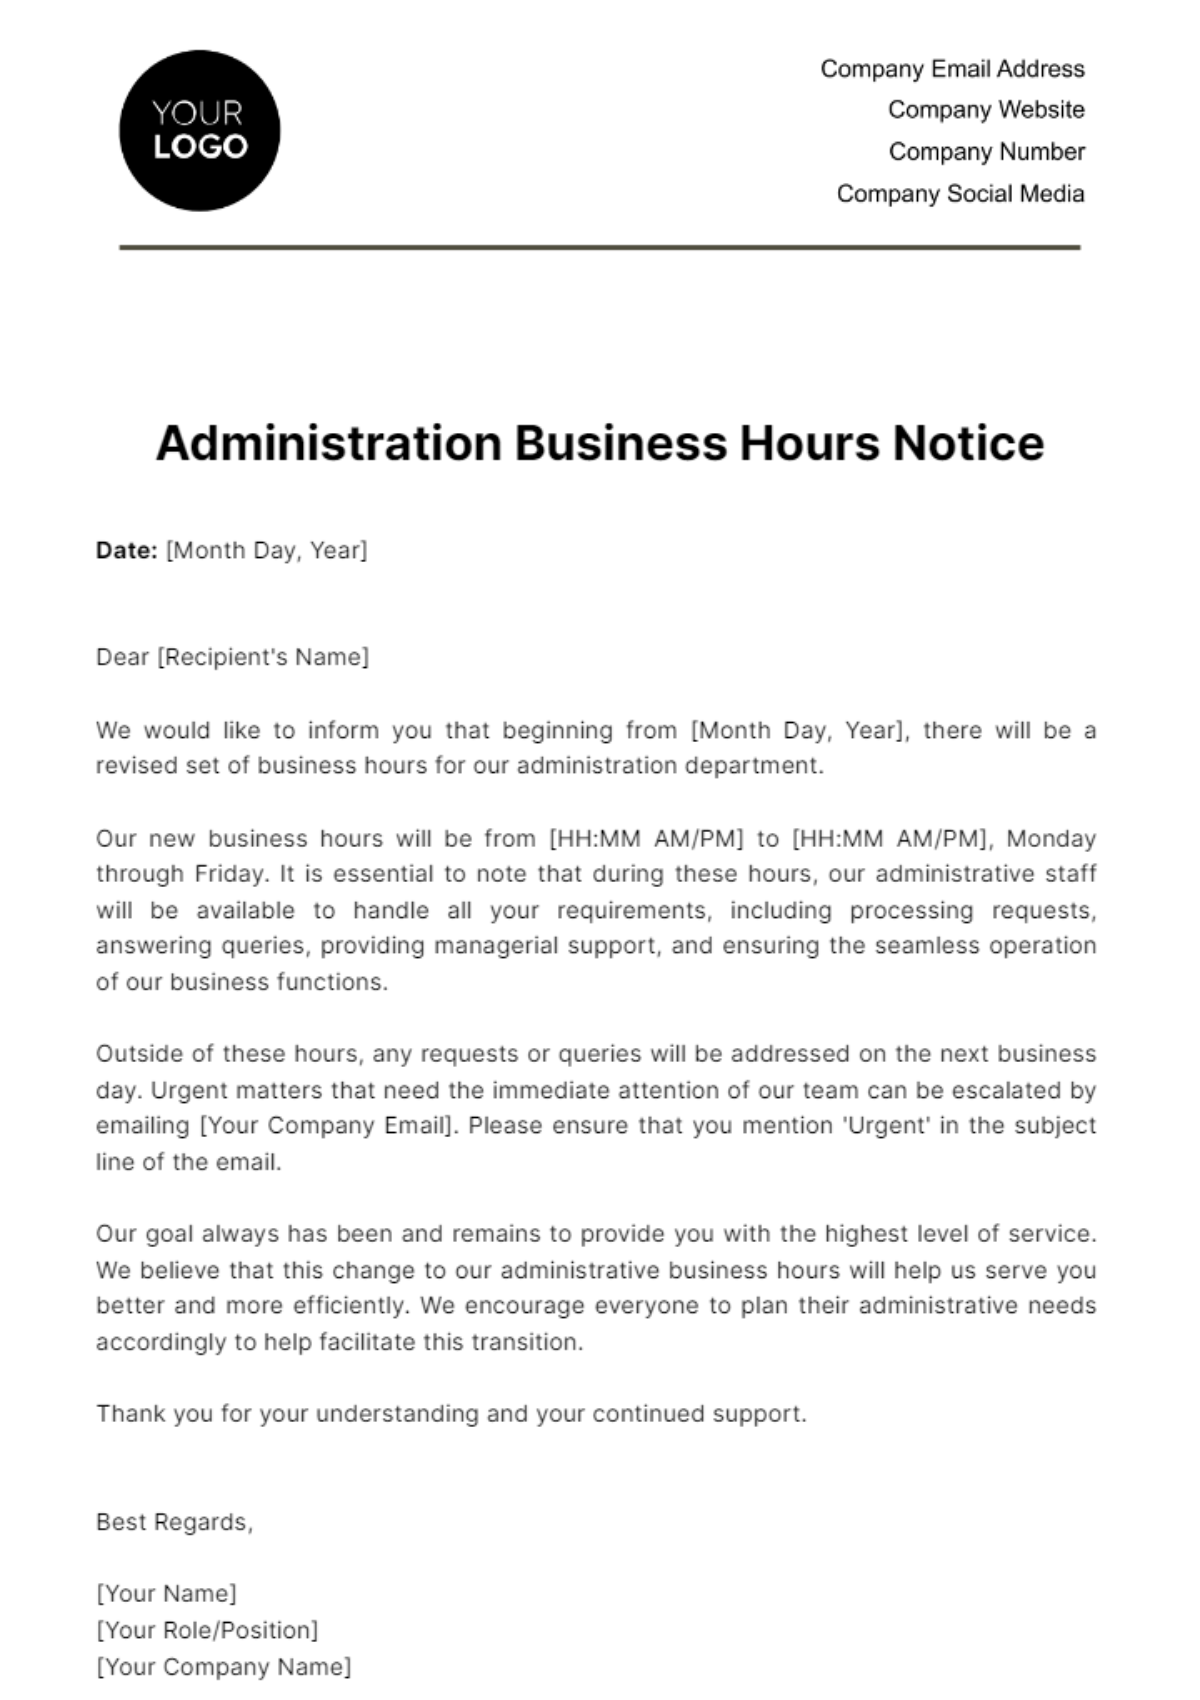 Administration Business Hours Notice Template